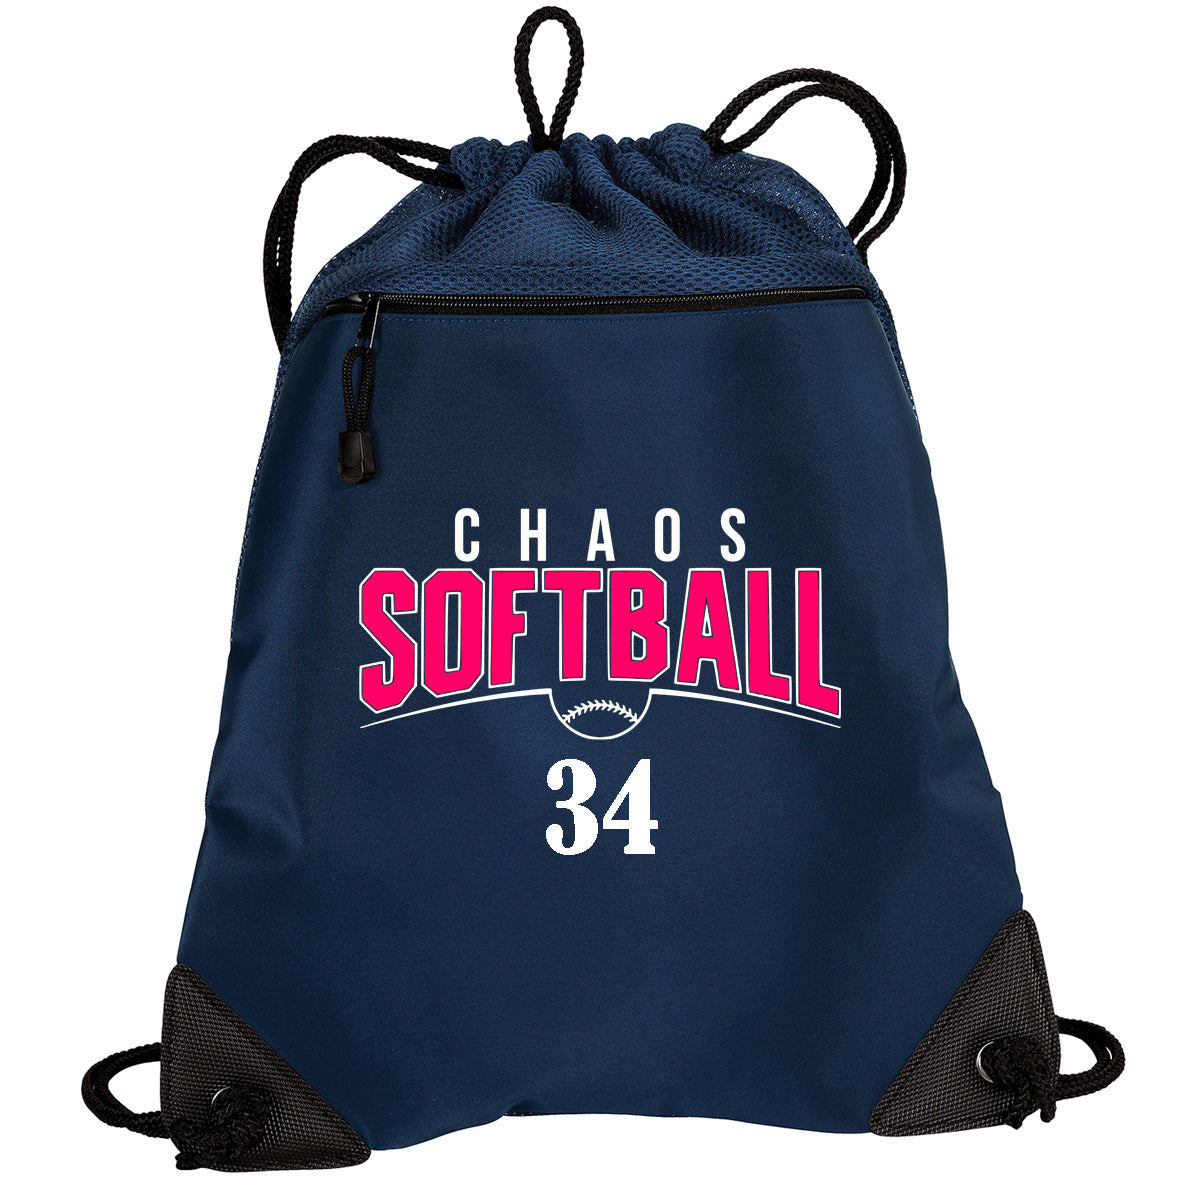 Chaos - Cinch Backpack with Chaos Softball Curved - Navy (BG810) - Southern Grace Creations